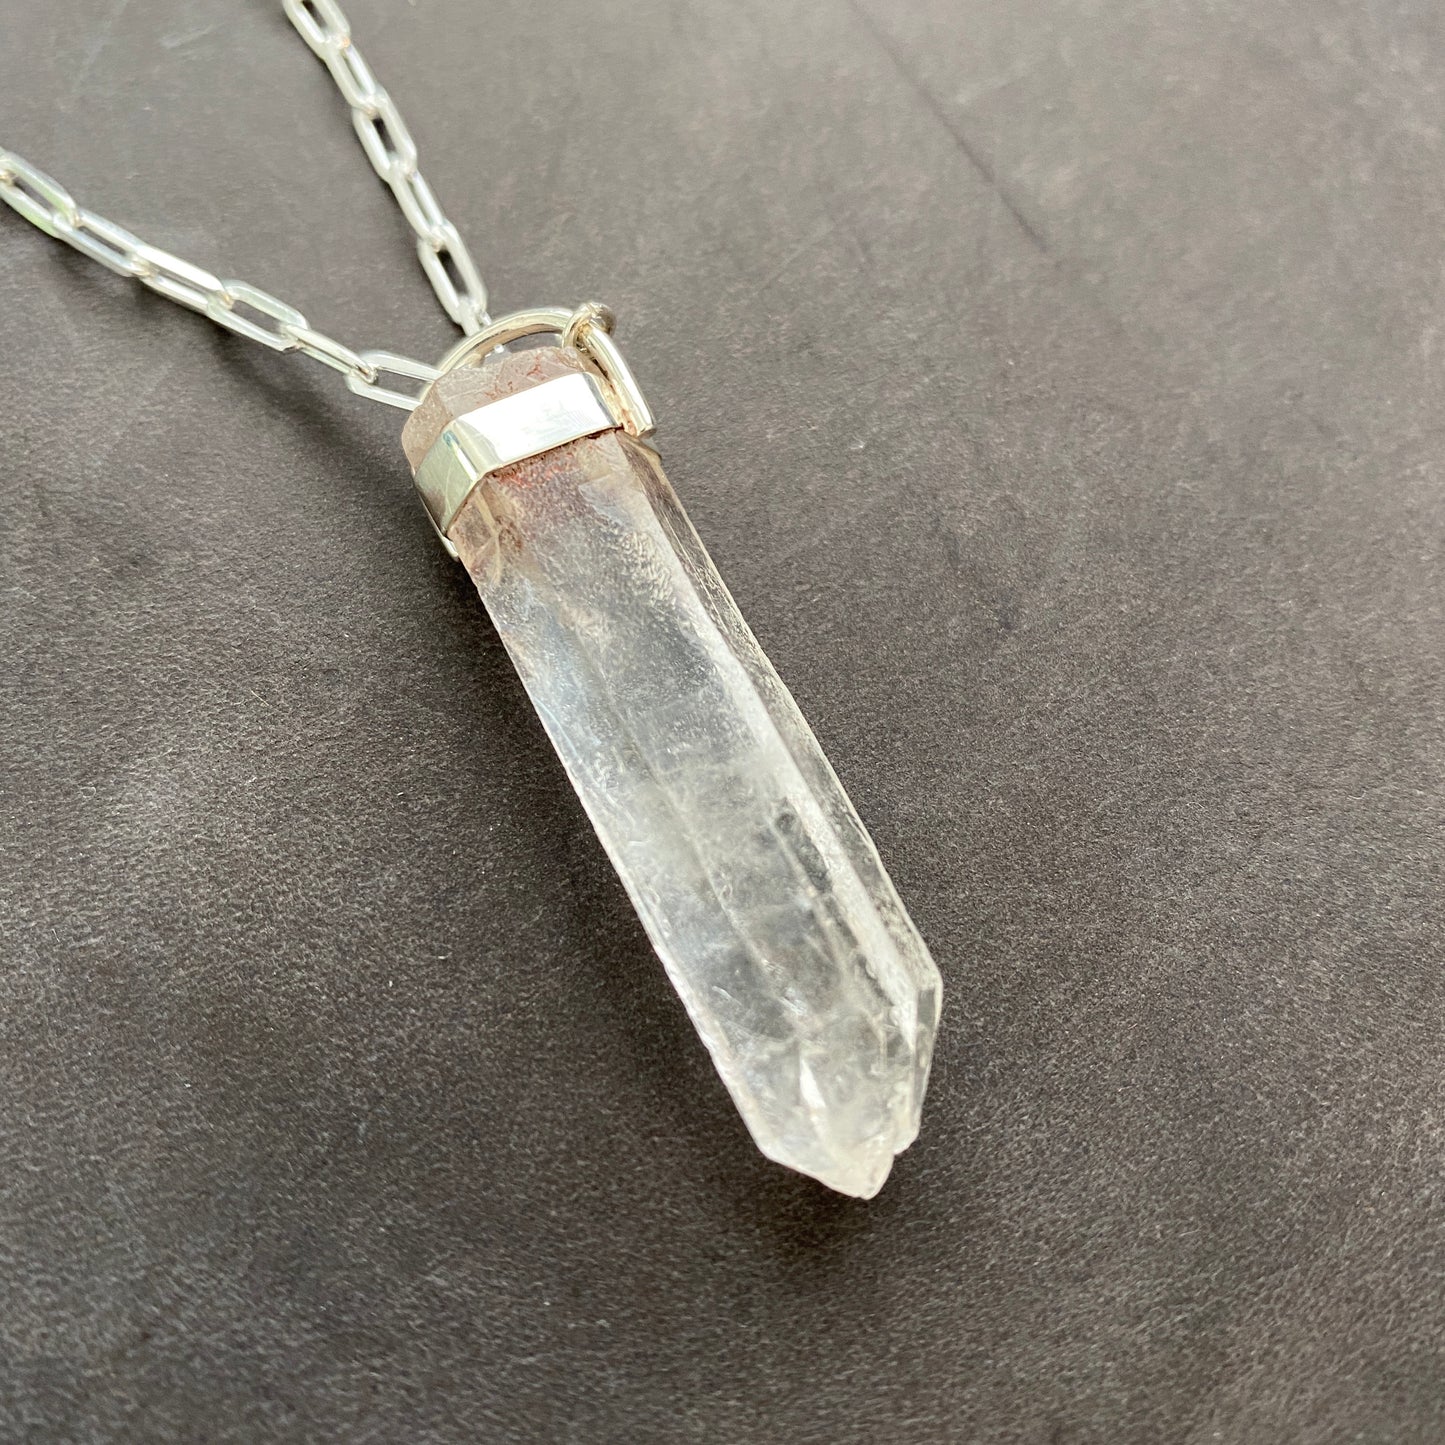 Raw, clear quartz pendant necklace with sterling silver chain. 24" necklace.